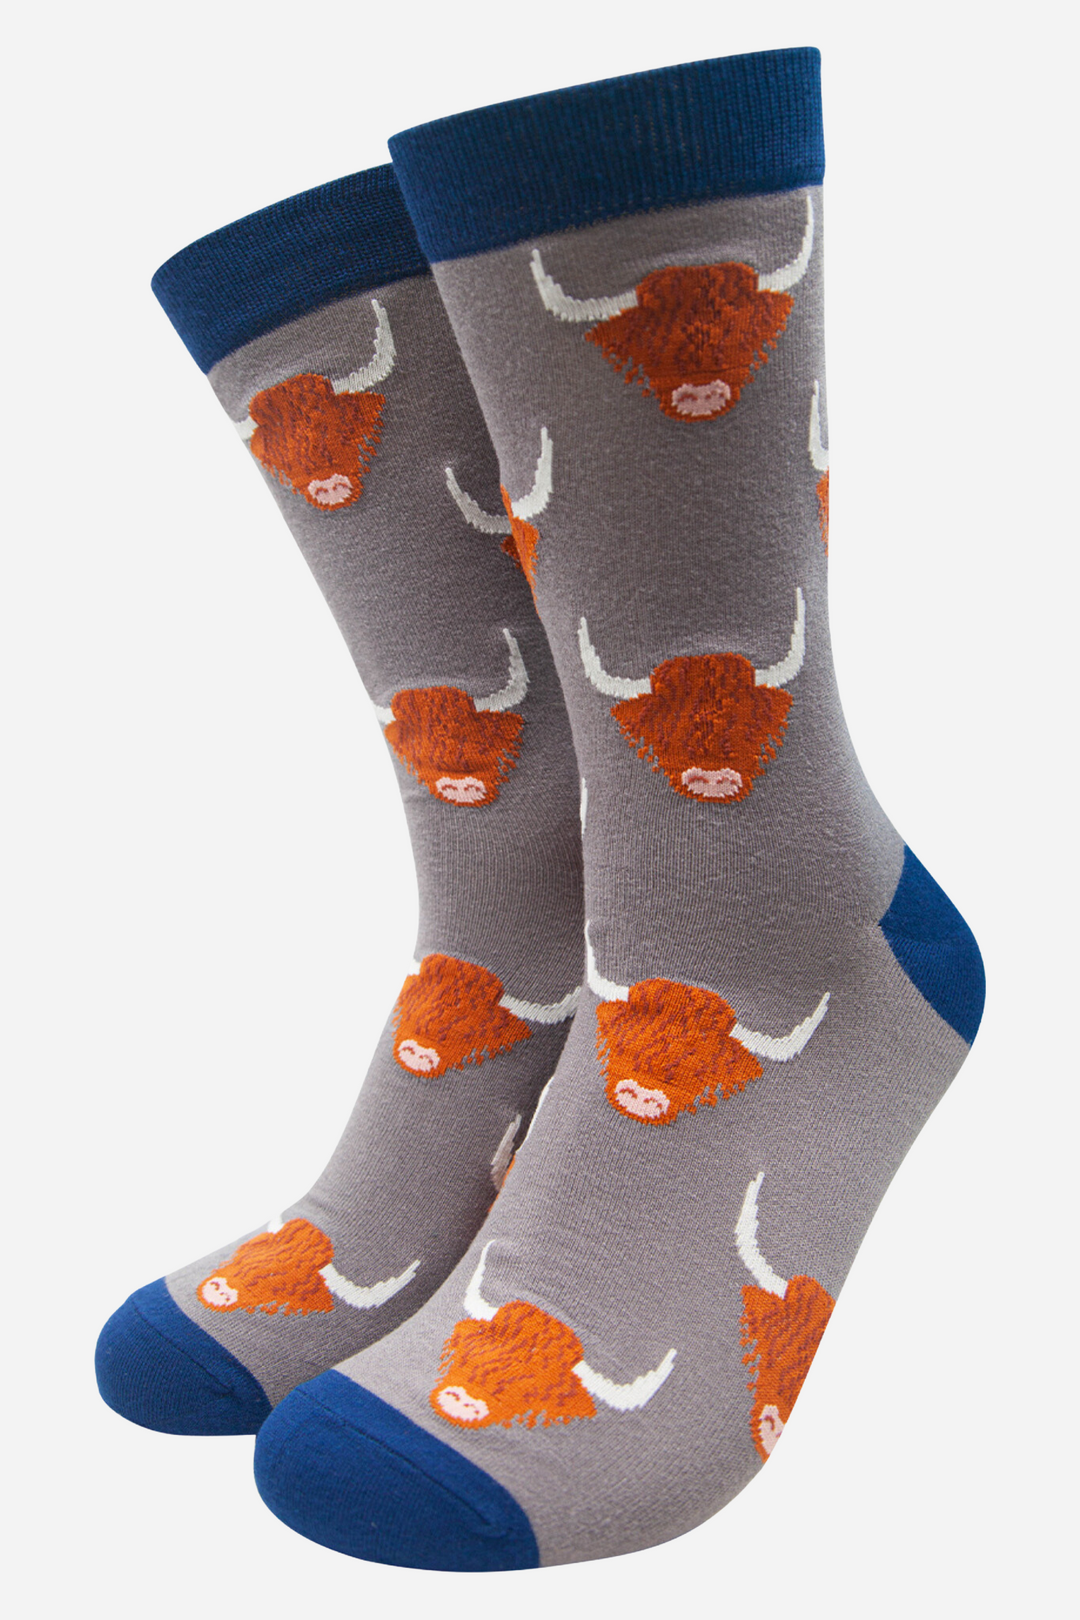 grey socks with blue heel, toe and cuff with an all over orange highland cow pattern